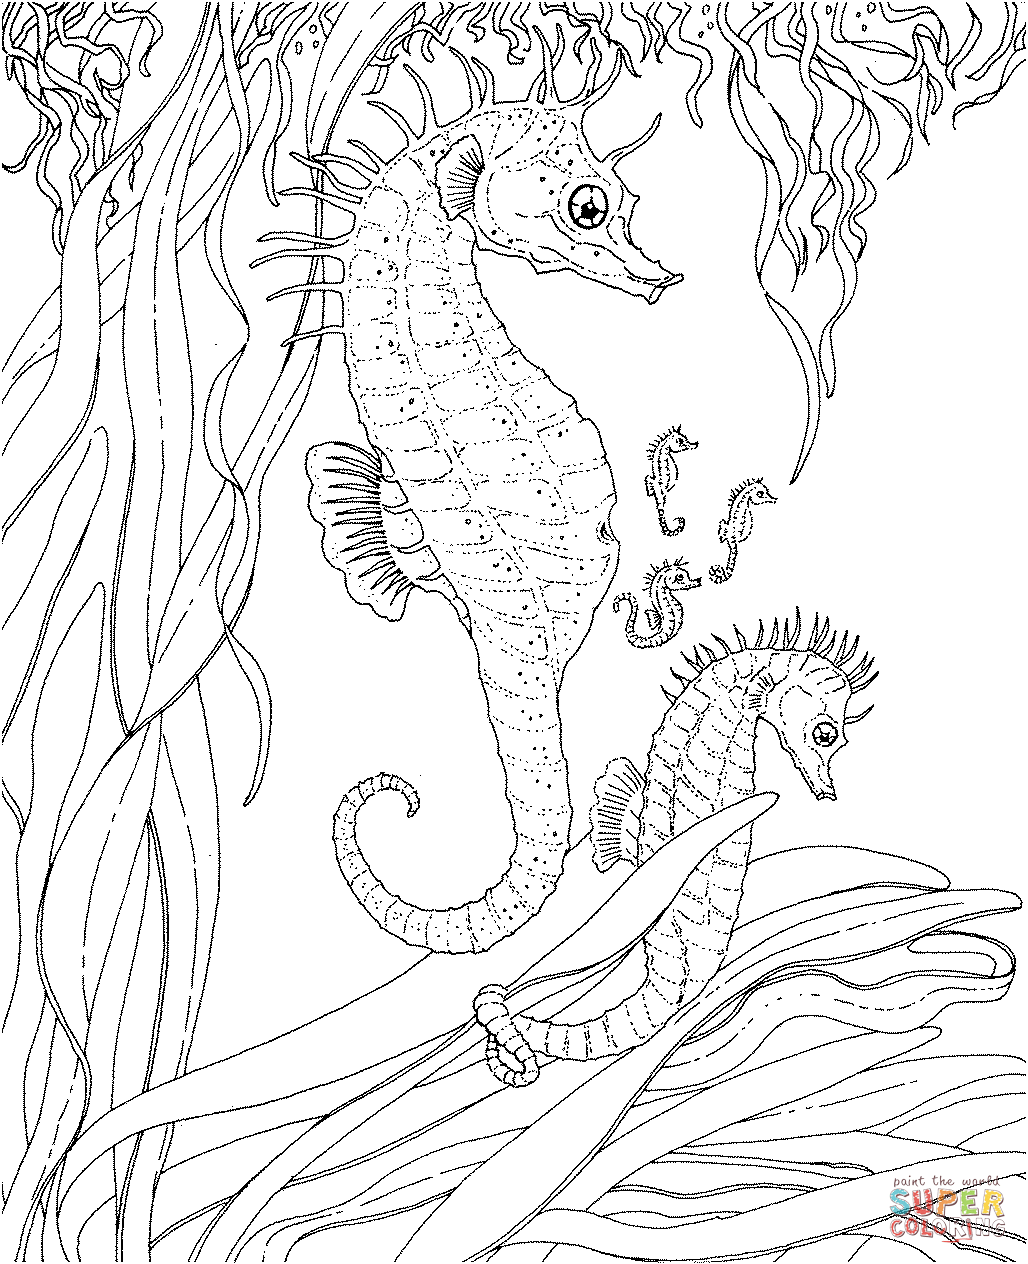 Seahorse coloring pages | Free Coloring Pages